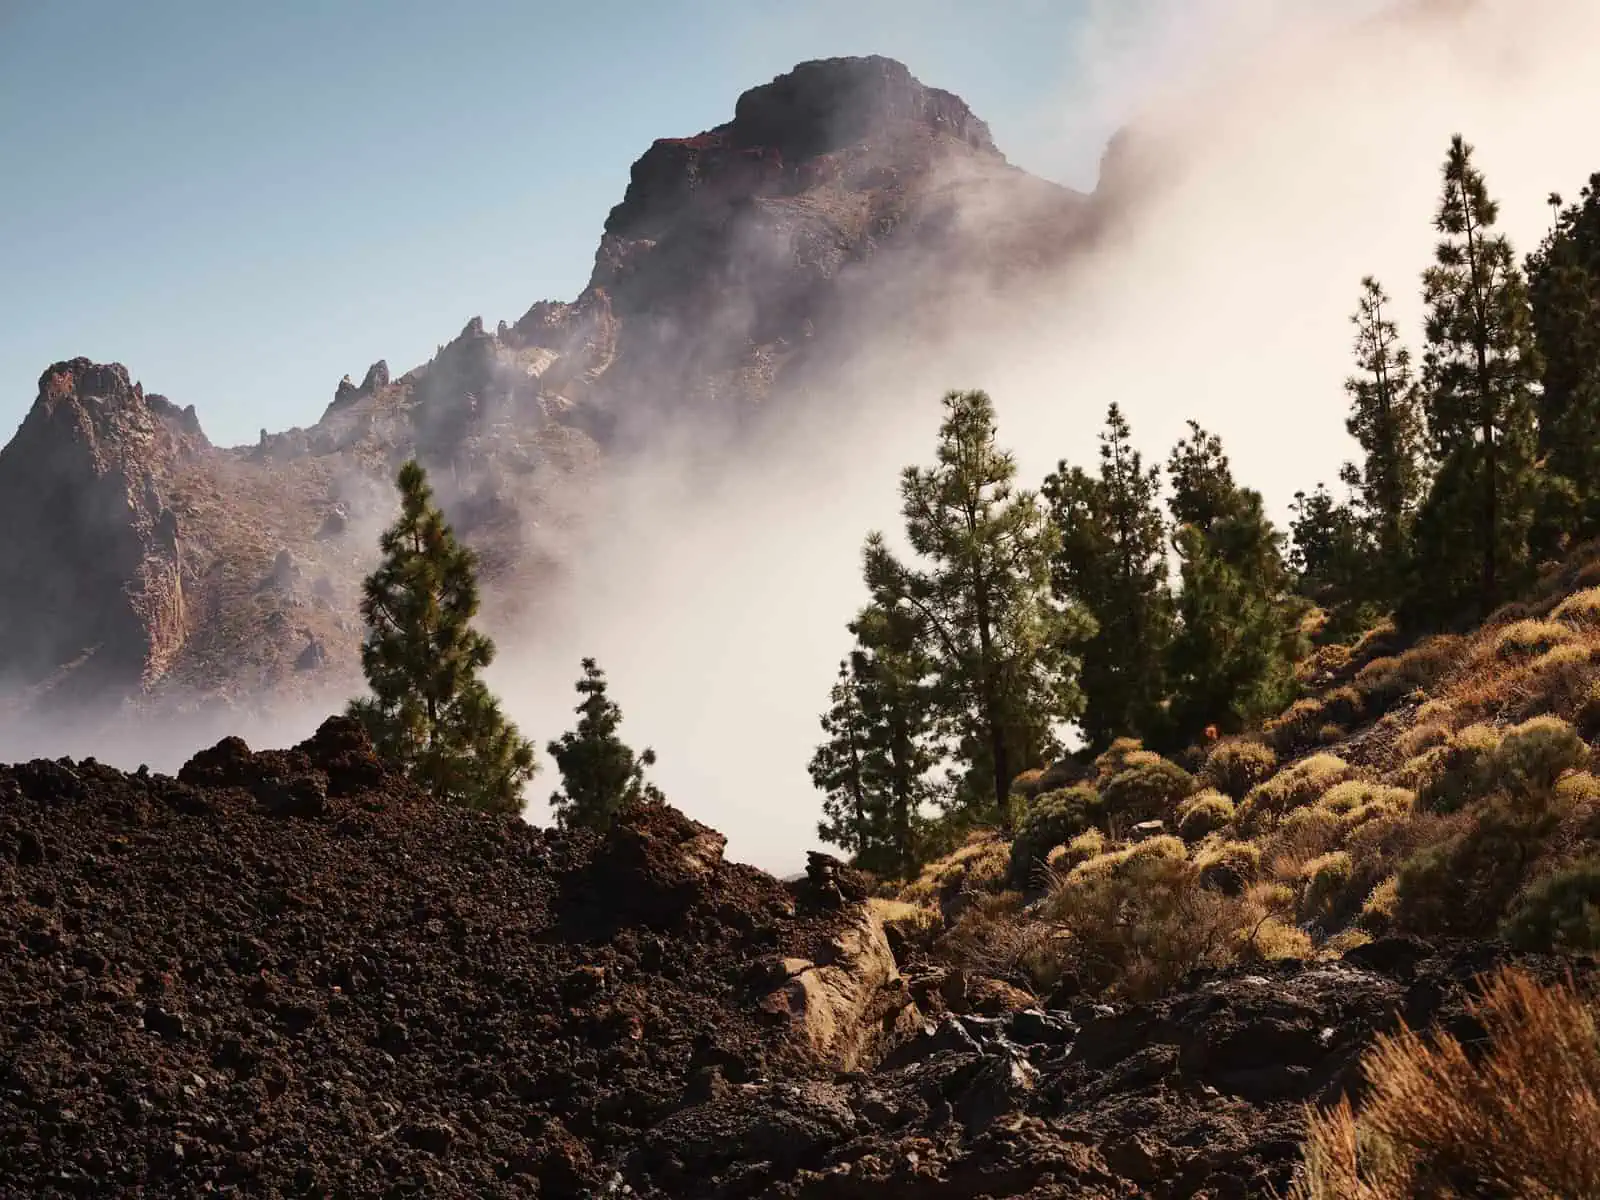 Tenerife: Discover Something Different in the Canary Islands - Fm Dsc F